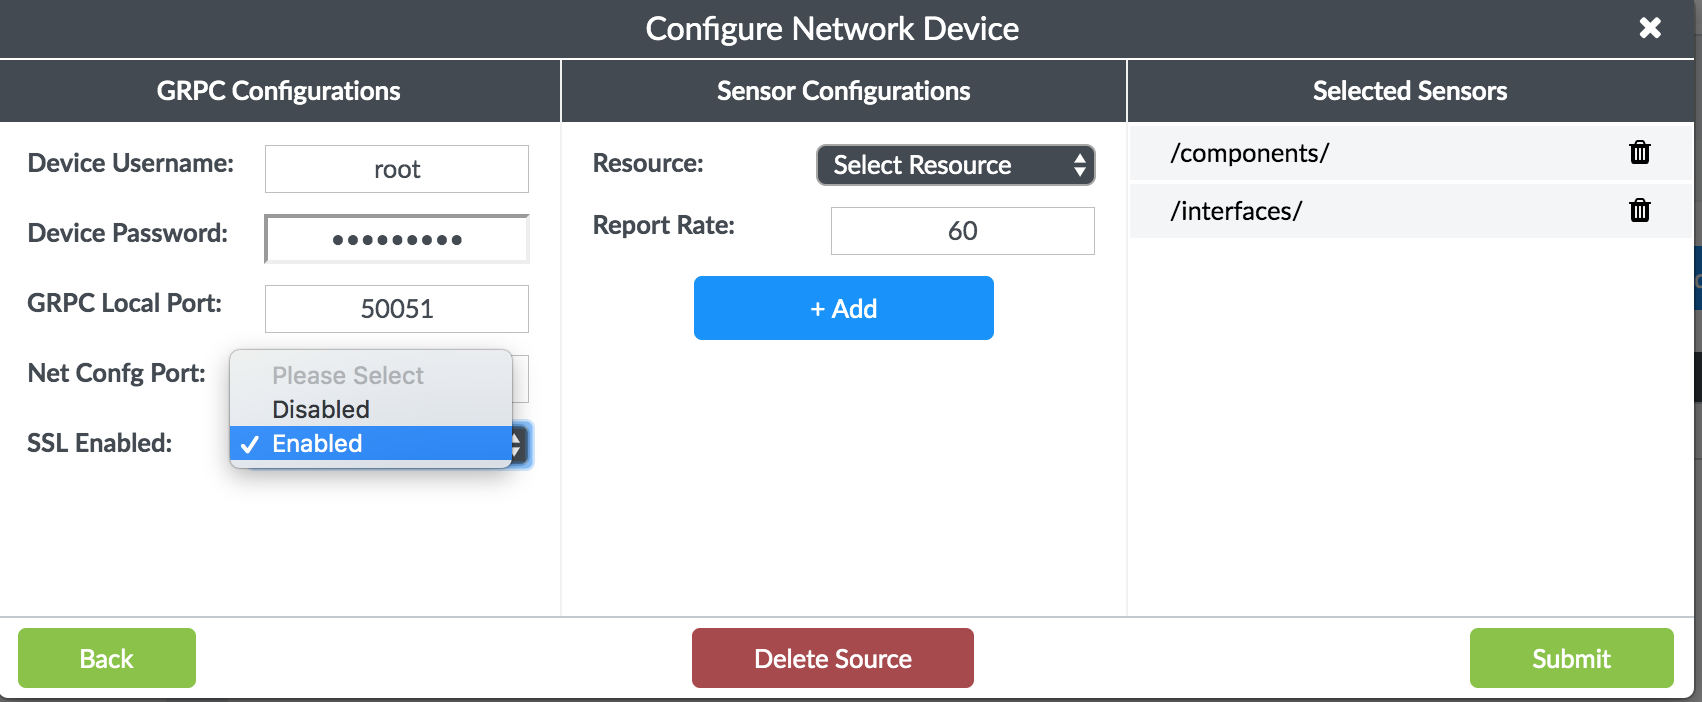 Configure gRPC Network Device Telemetry and Enable
SSL